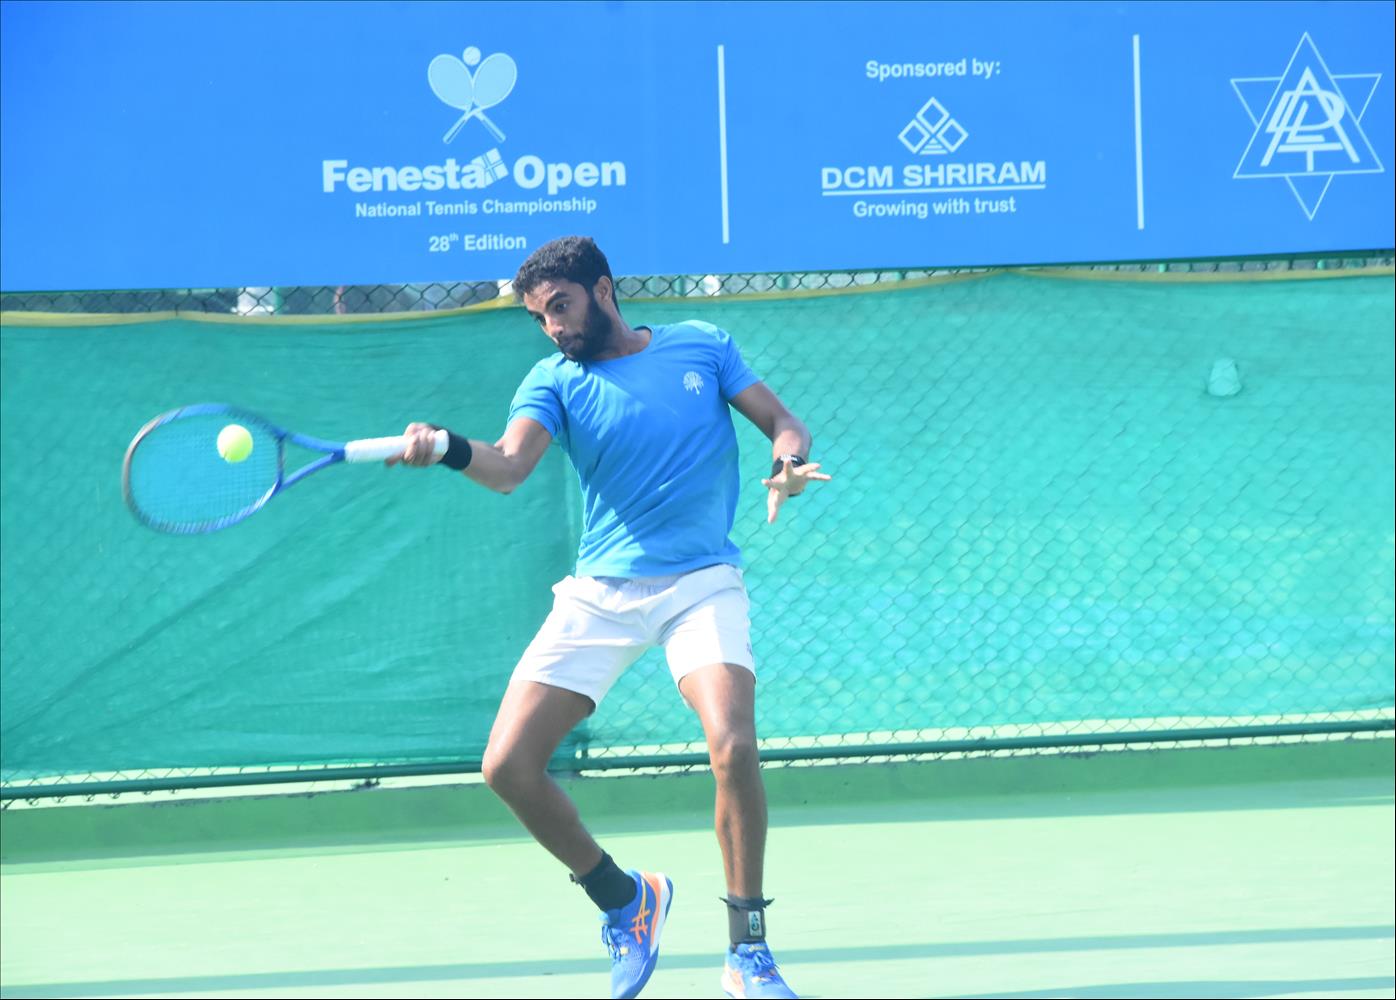 Manish Sureshkumar Launches Title Defence At The National Tennis Championship With Victory